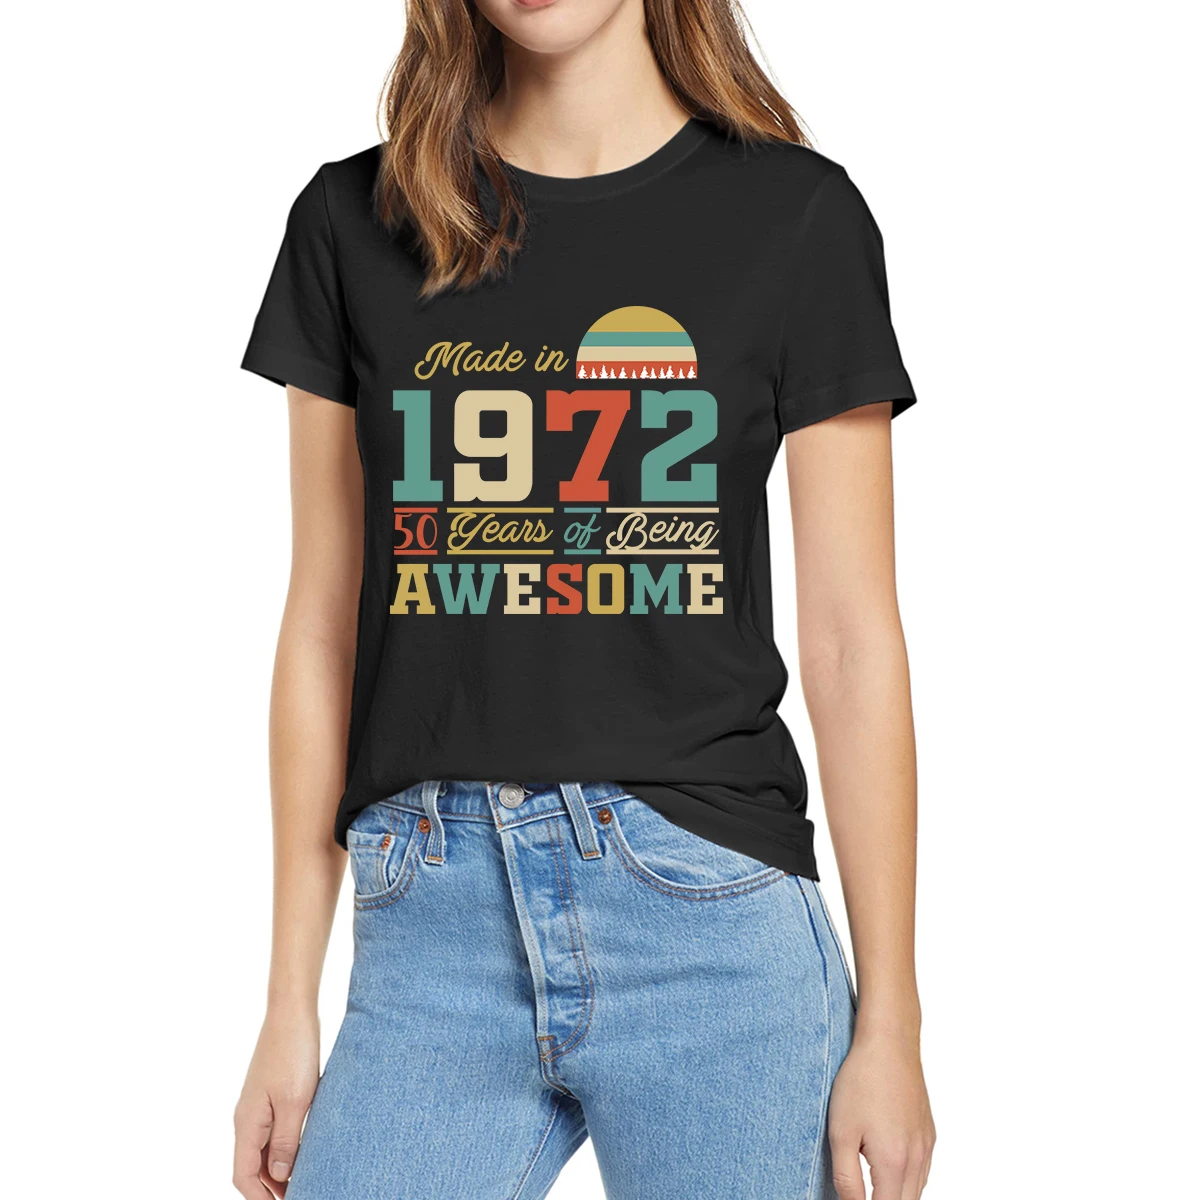 

100% Cotton 1972 Tee 50 Years of Being Awesome 50th Birthday Gifts Summer Women Casual Novelty T-Shirt Unisex Loose Tops Tee